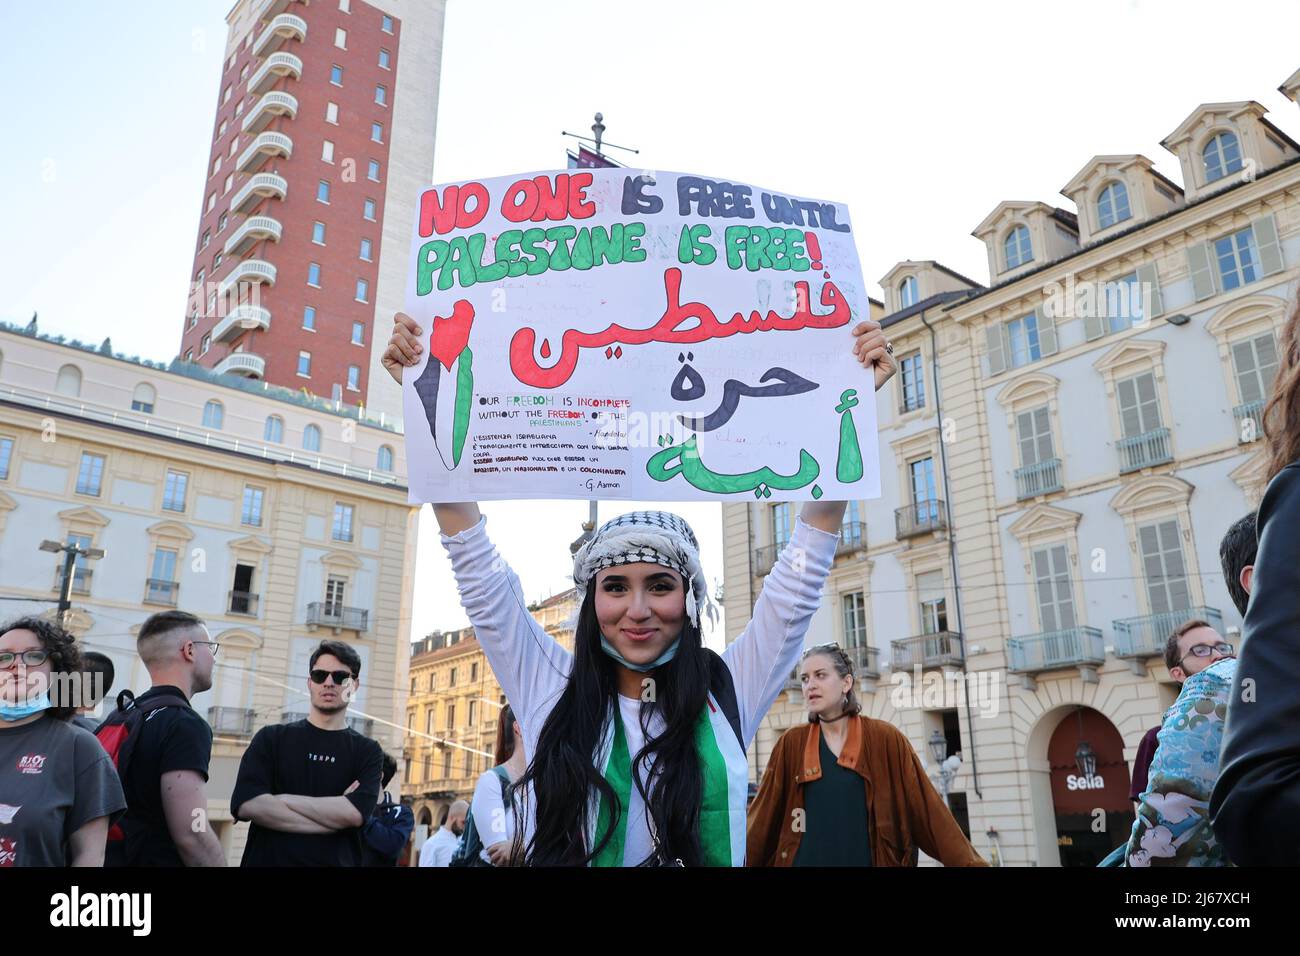 Turin, Italy. 28th April, 2022. A woman protests against the raids of Israeli forces in West Bank and restrictions on access to holy sites in Jerusalem during the Ramadan time holding a placard showing:“No one is free until Palestine is free”. Credit: MLBARIONA/Alamy Live News Stock Photo